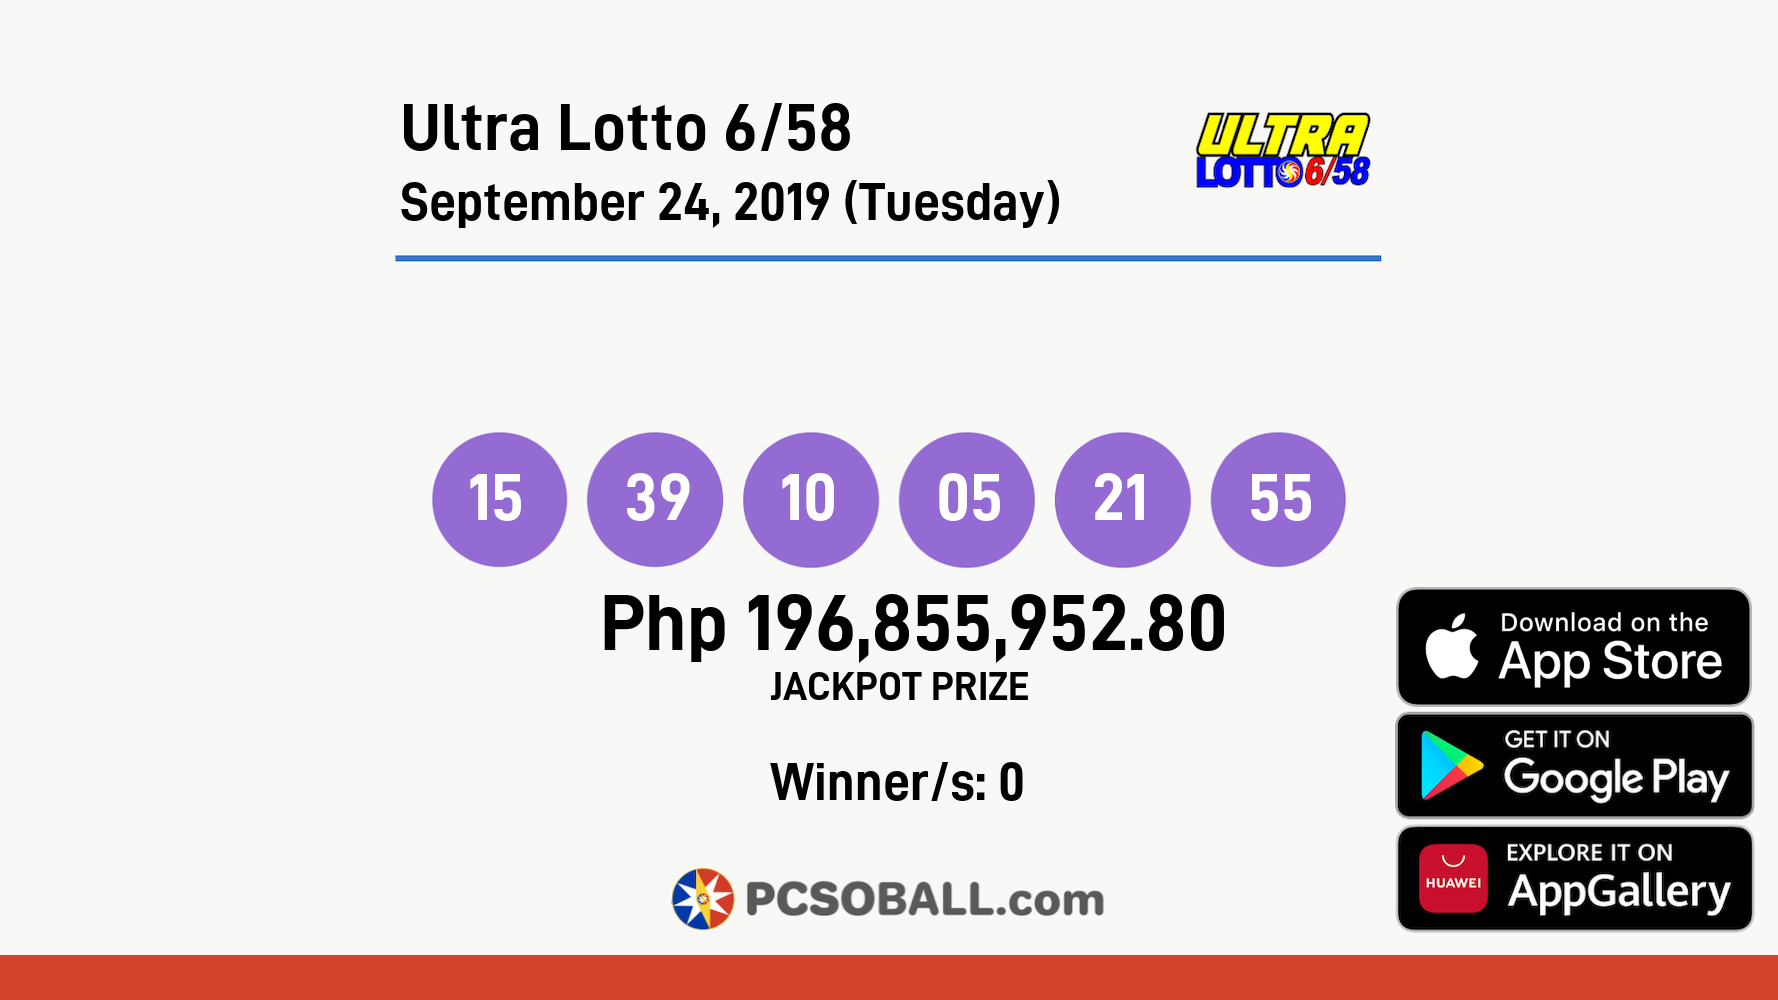 Ultra Lotto 6/58 September 24, 2019 (Tuesday) Result